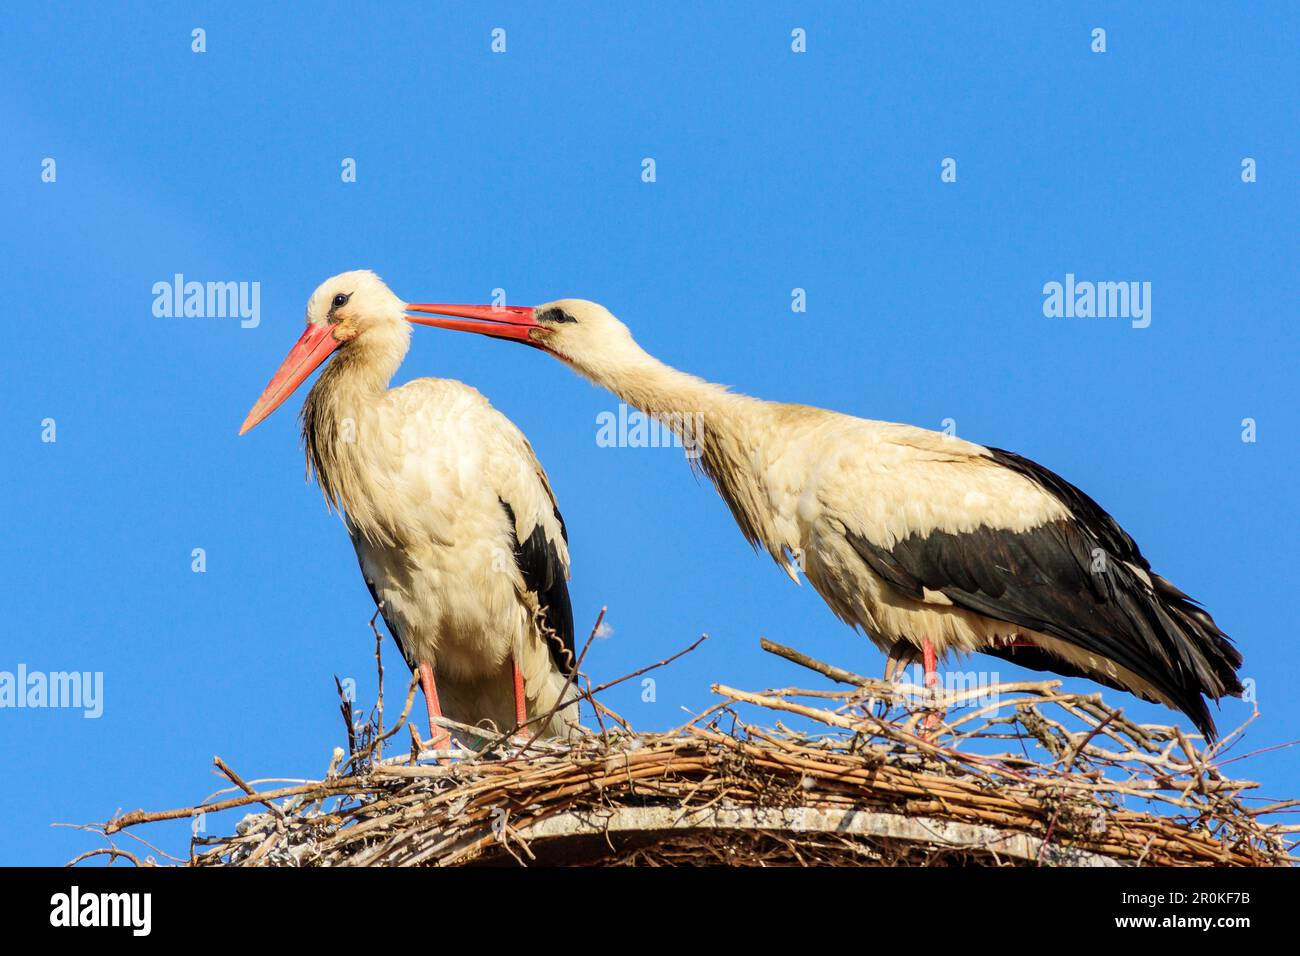 Two white storks sitting on nest and preening each other, Ciconia ciconia, Rust, lake Neusiedl, National Park lake Neusiedl, UNESCO World Heritage Sit Stock Photo